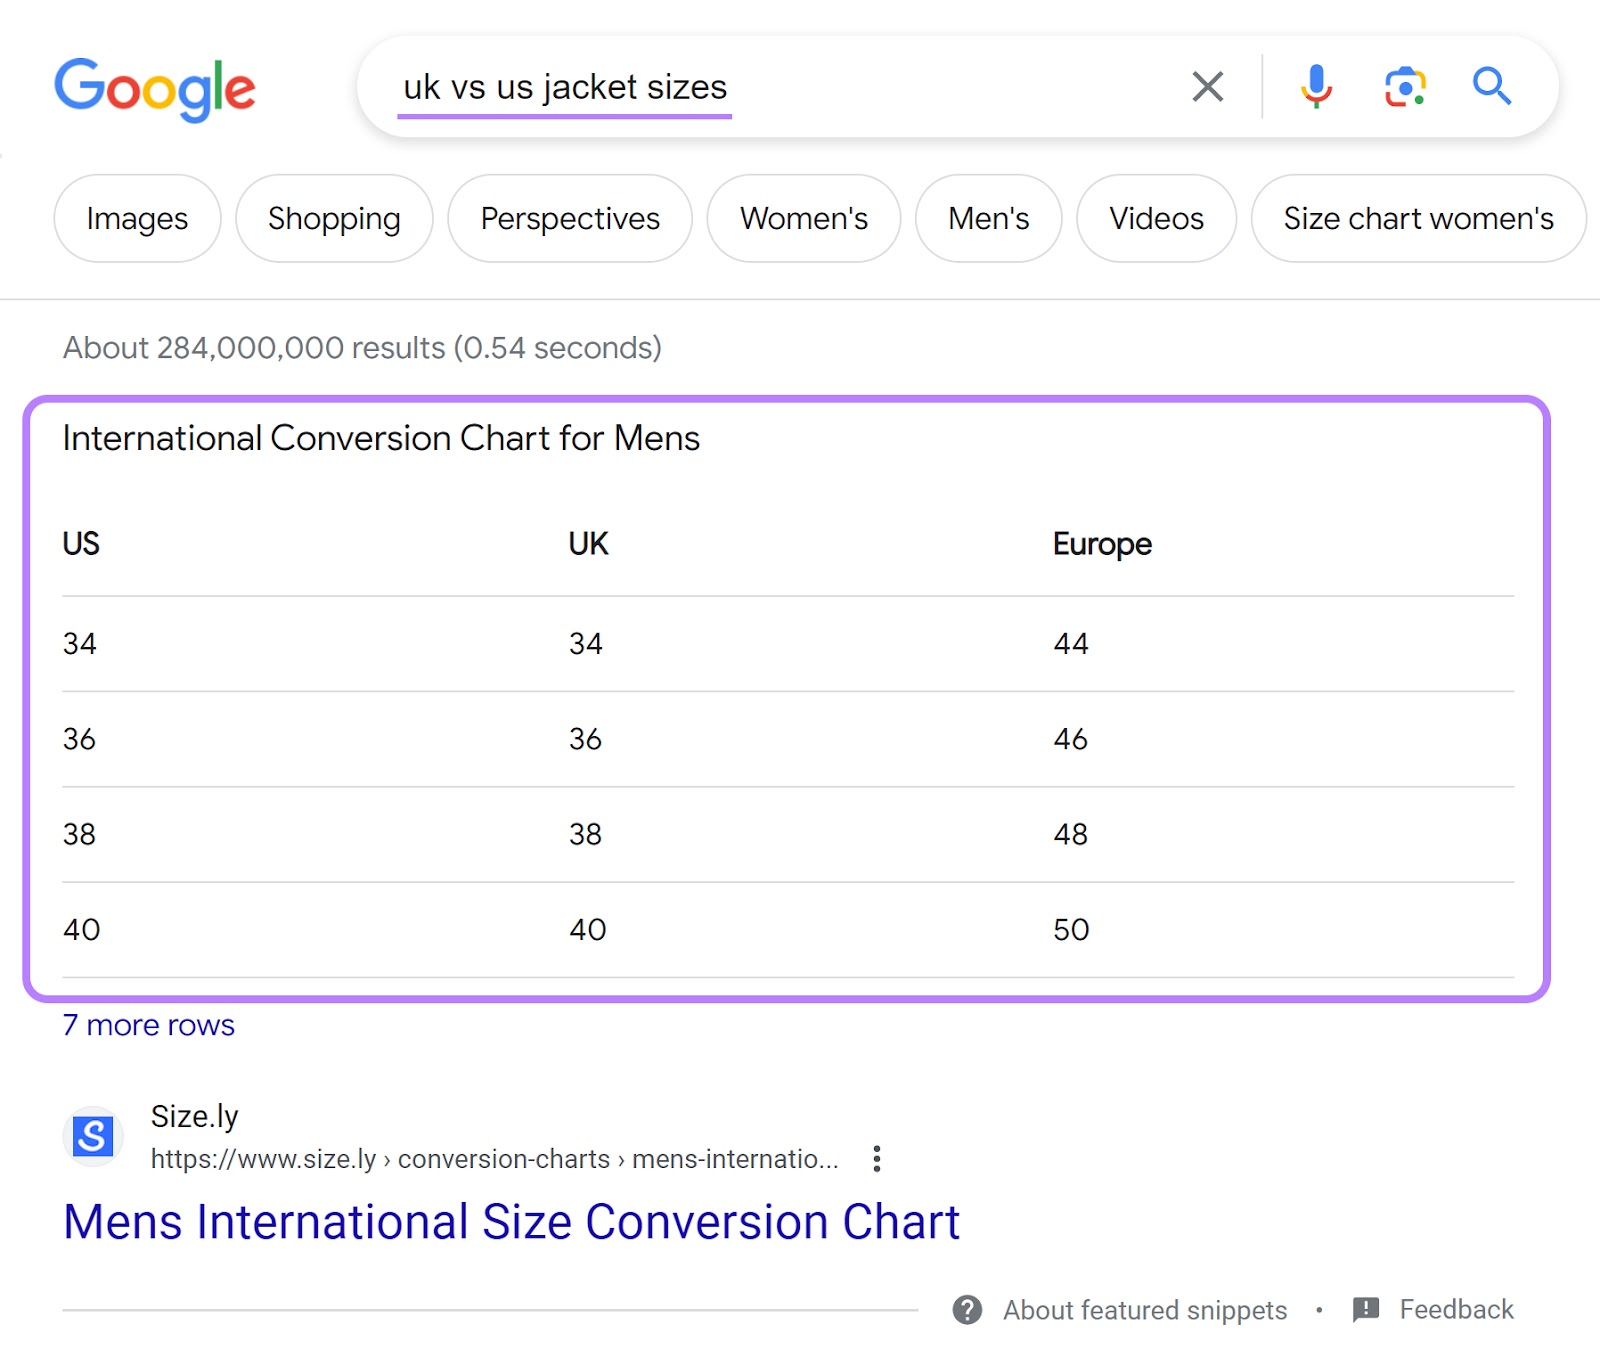 A table featured snippet on Google's SERP for "uk vs us jacket sizes" query